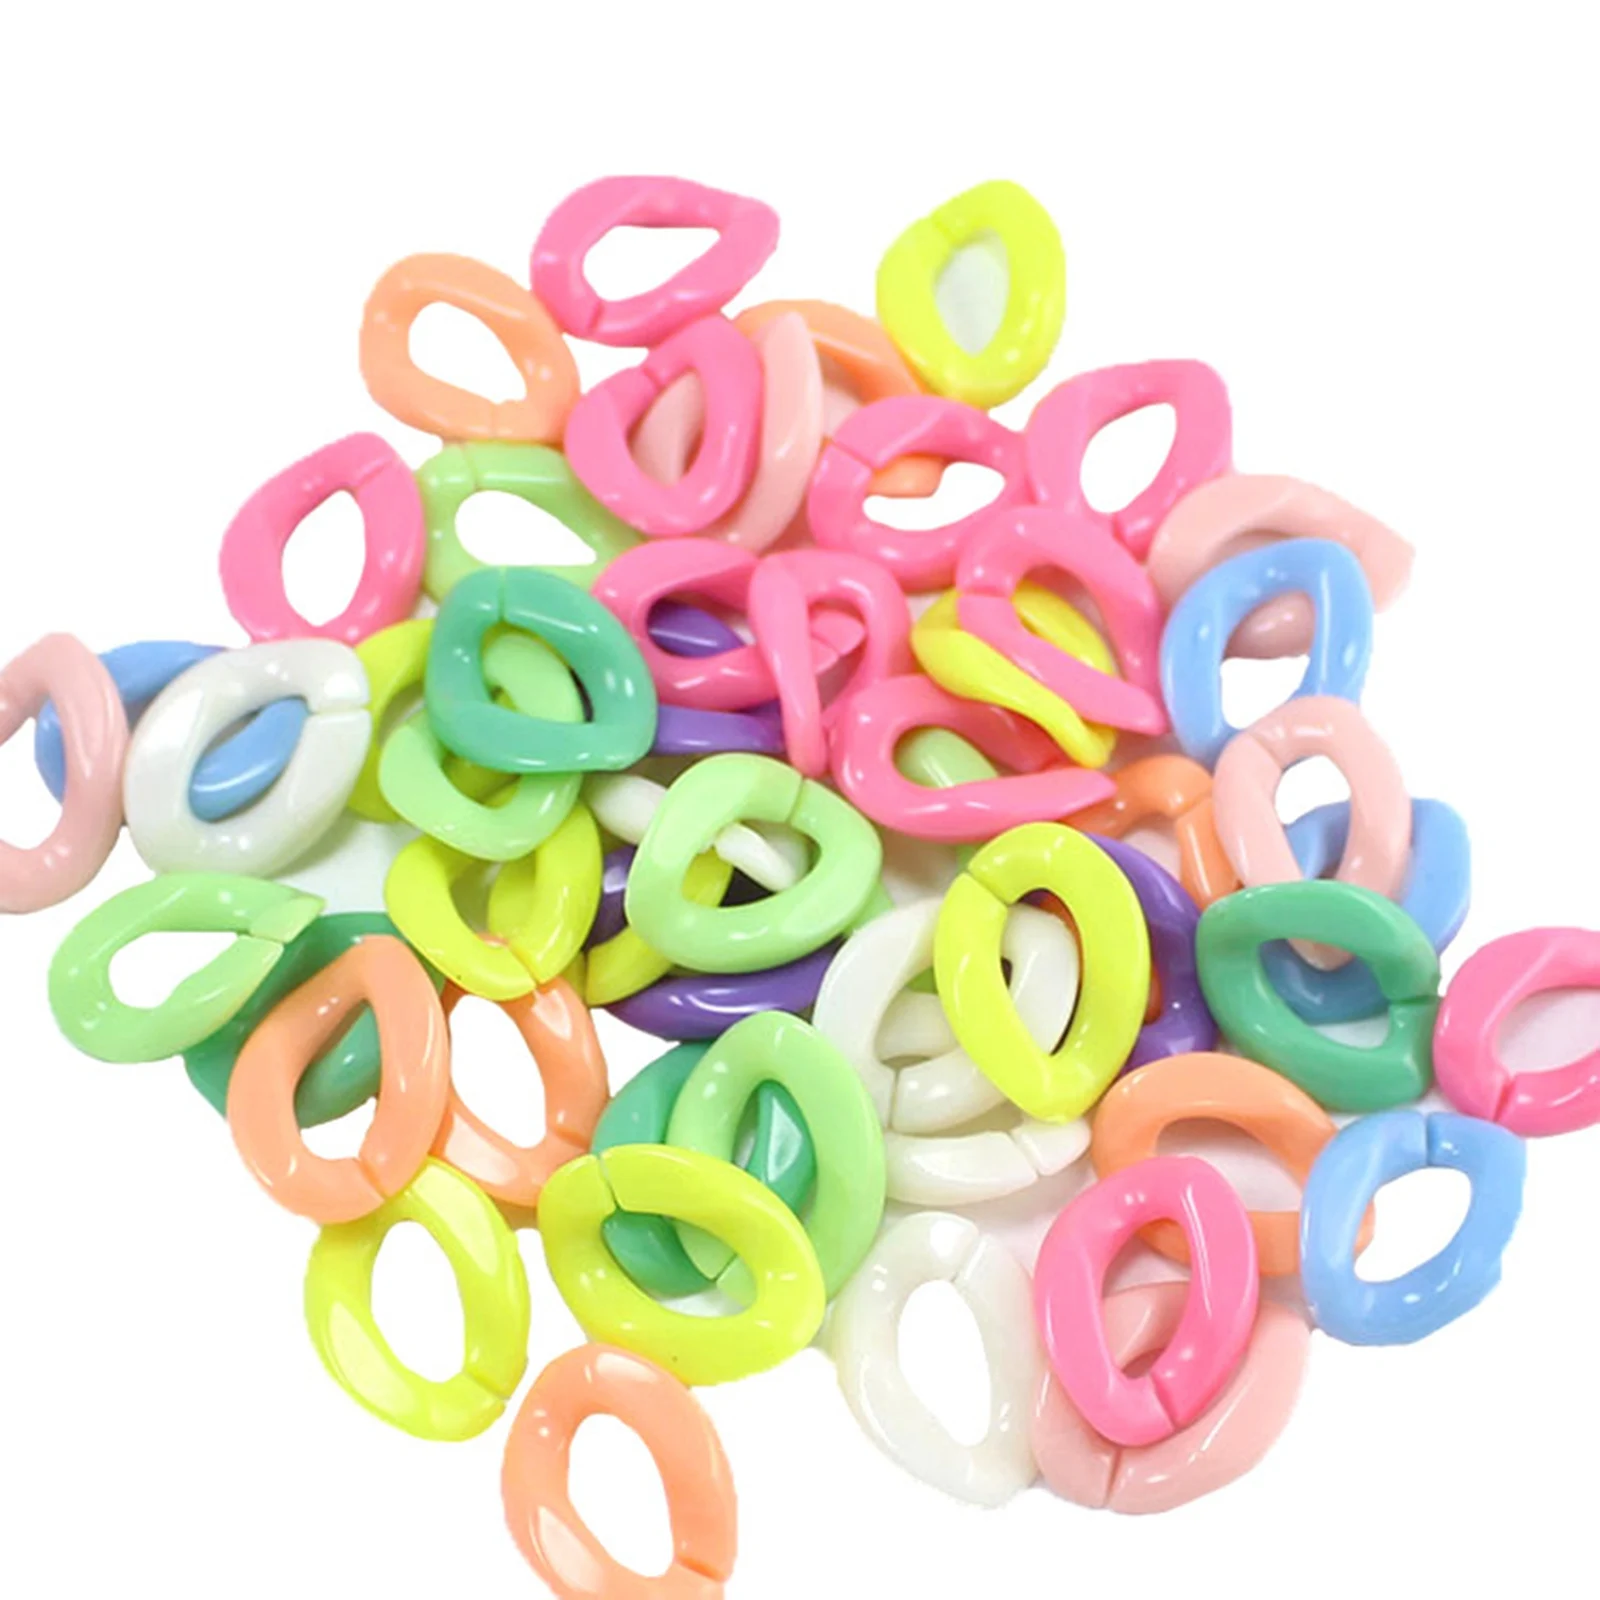 

100 Mixed Pastel Color Acrylic Flat Twist Oval Linking Rings Open Chain Beads 23X17mm Connector link Chain For Necklace Bracelet